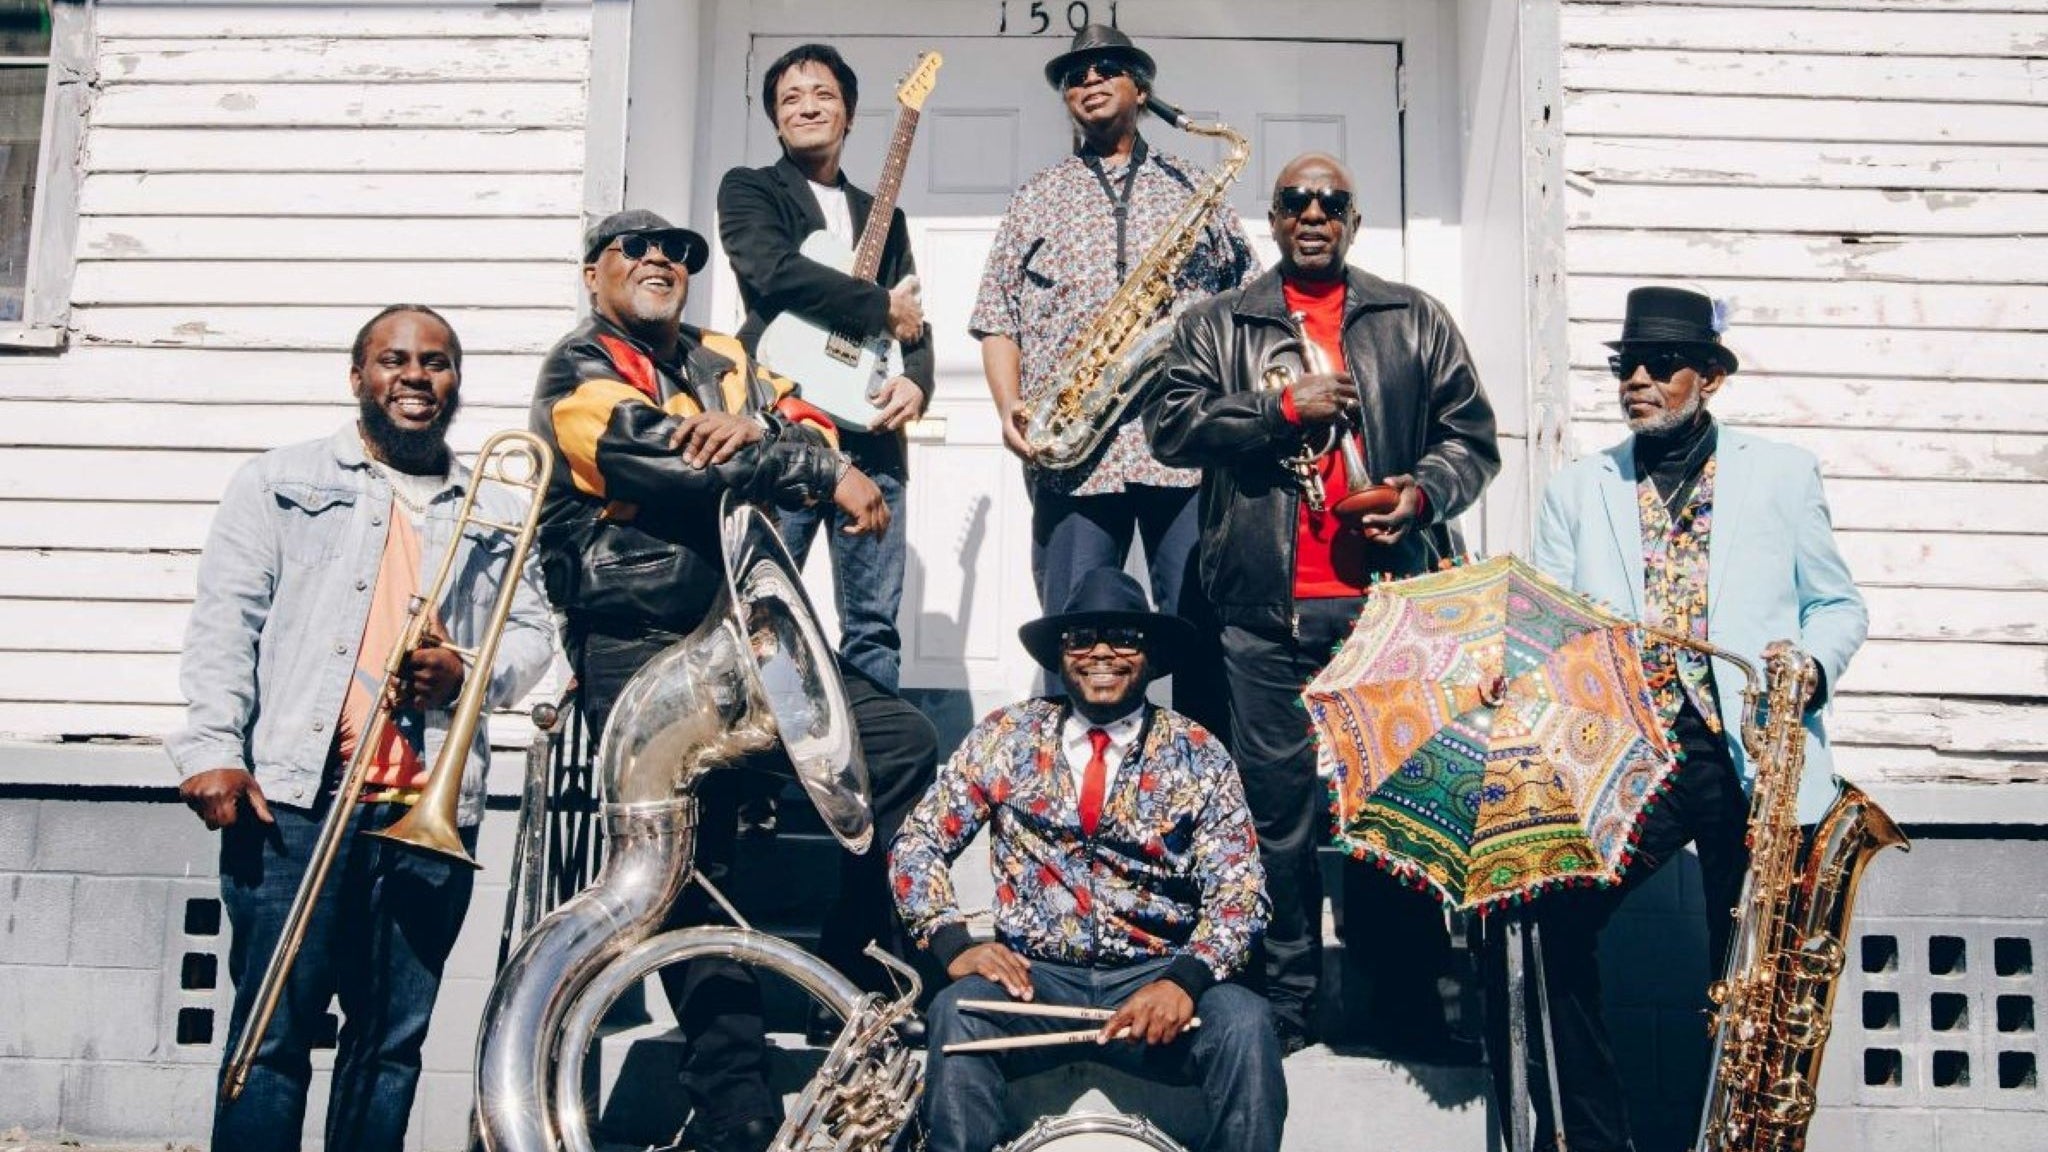 The Dirty Dozen Brass Band in Portsmouth promo photo for Inner Circle presale offer code